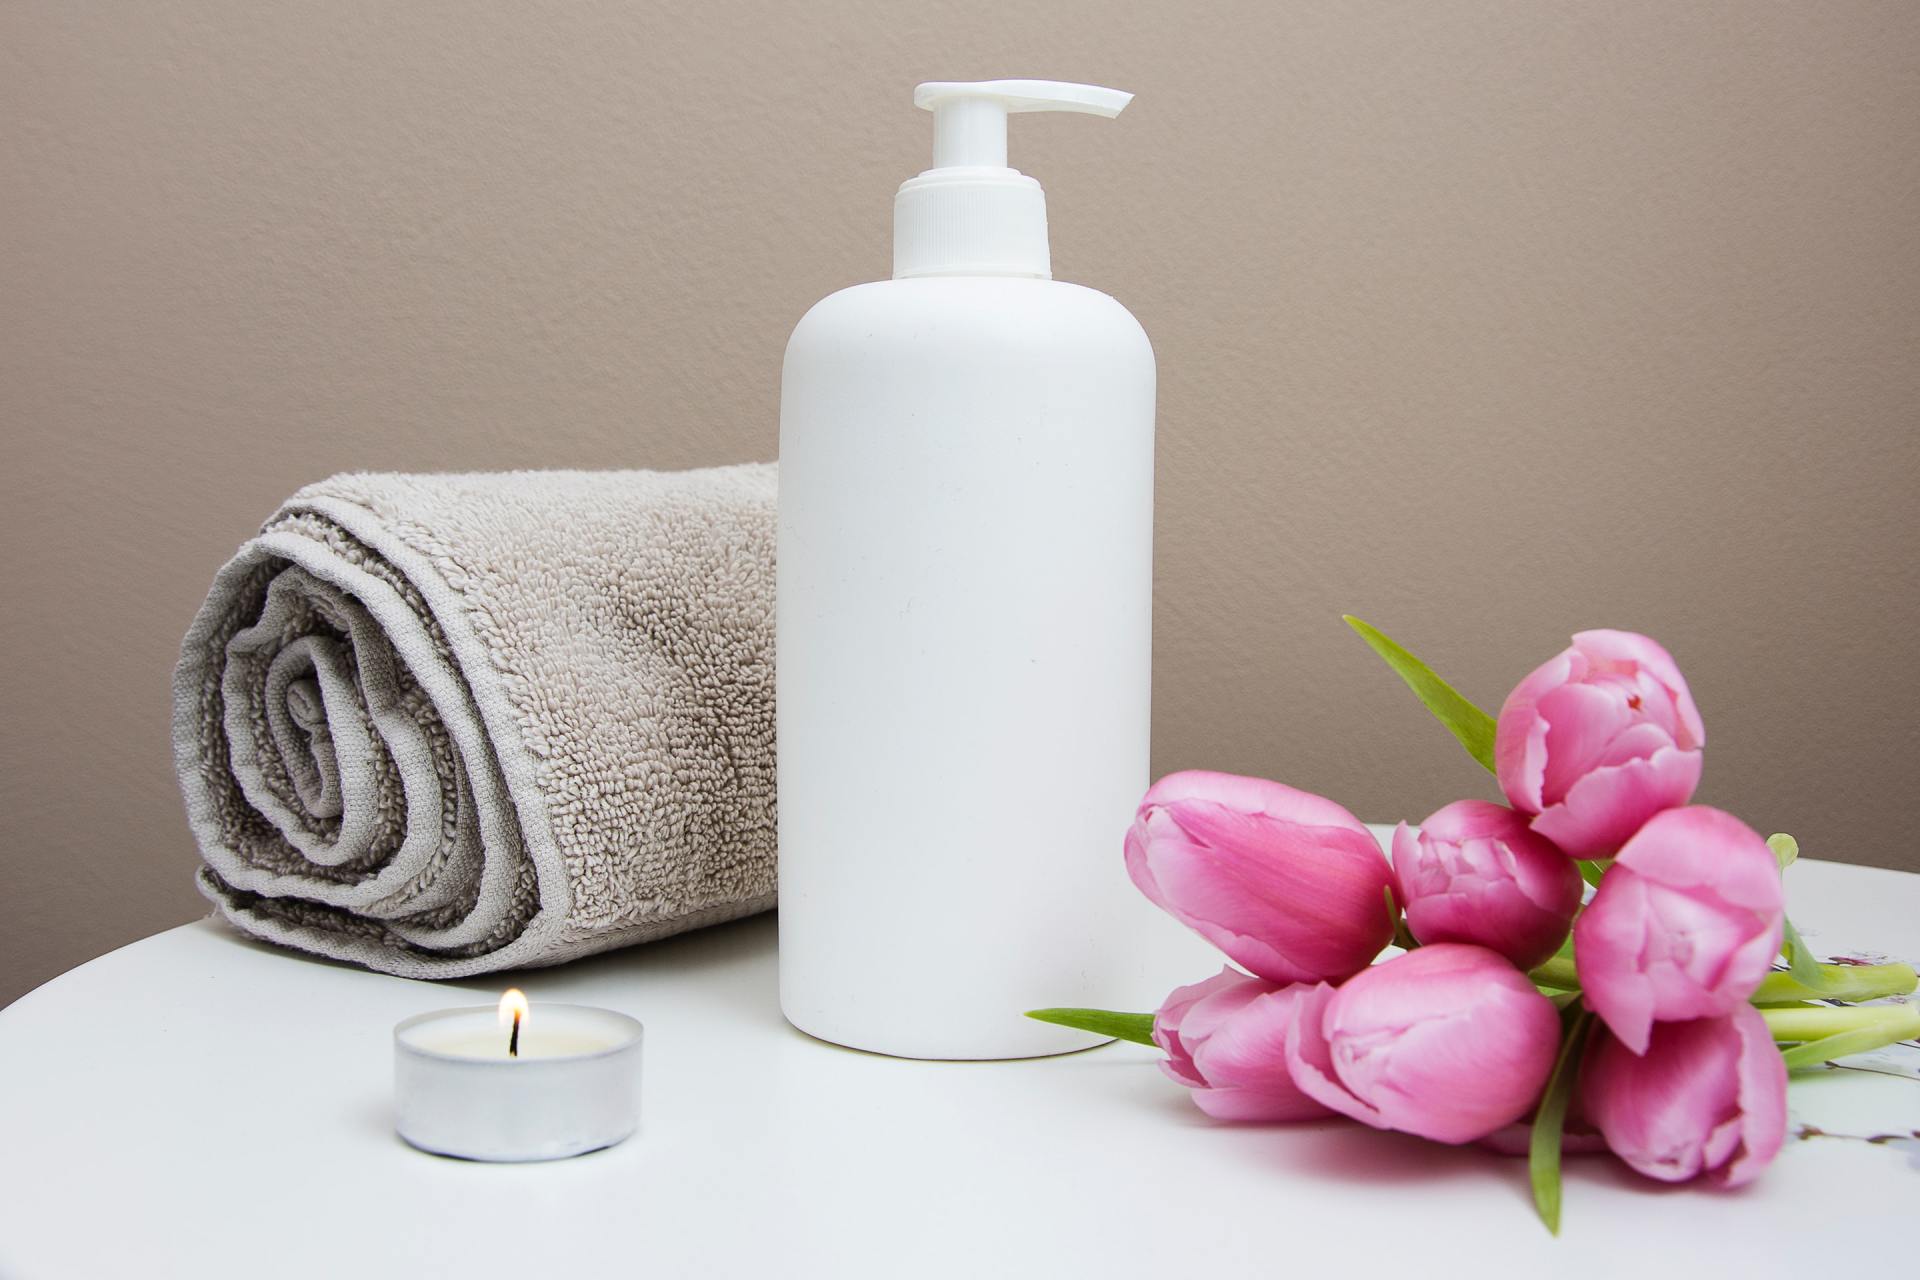 Skin Care bottle with a tealight candle, Towel and Tulips